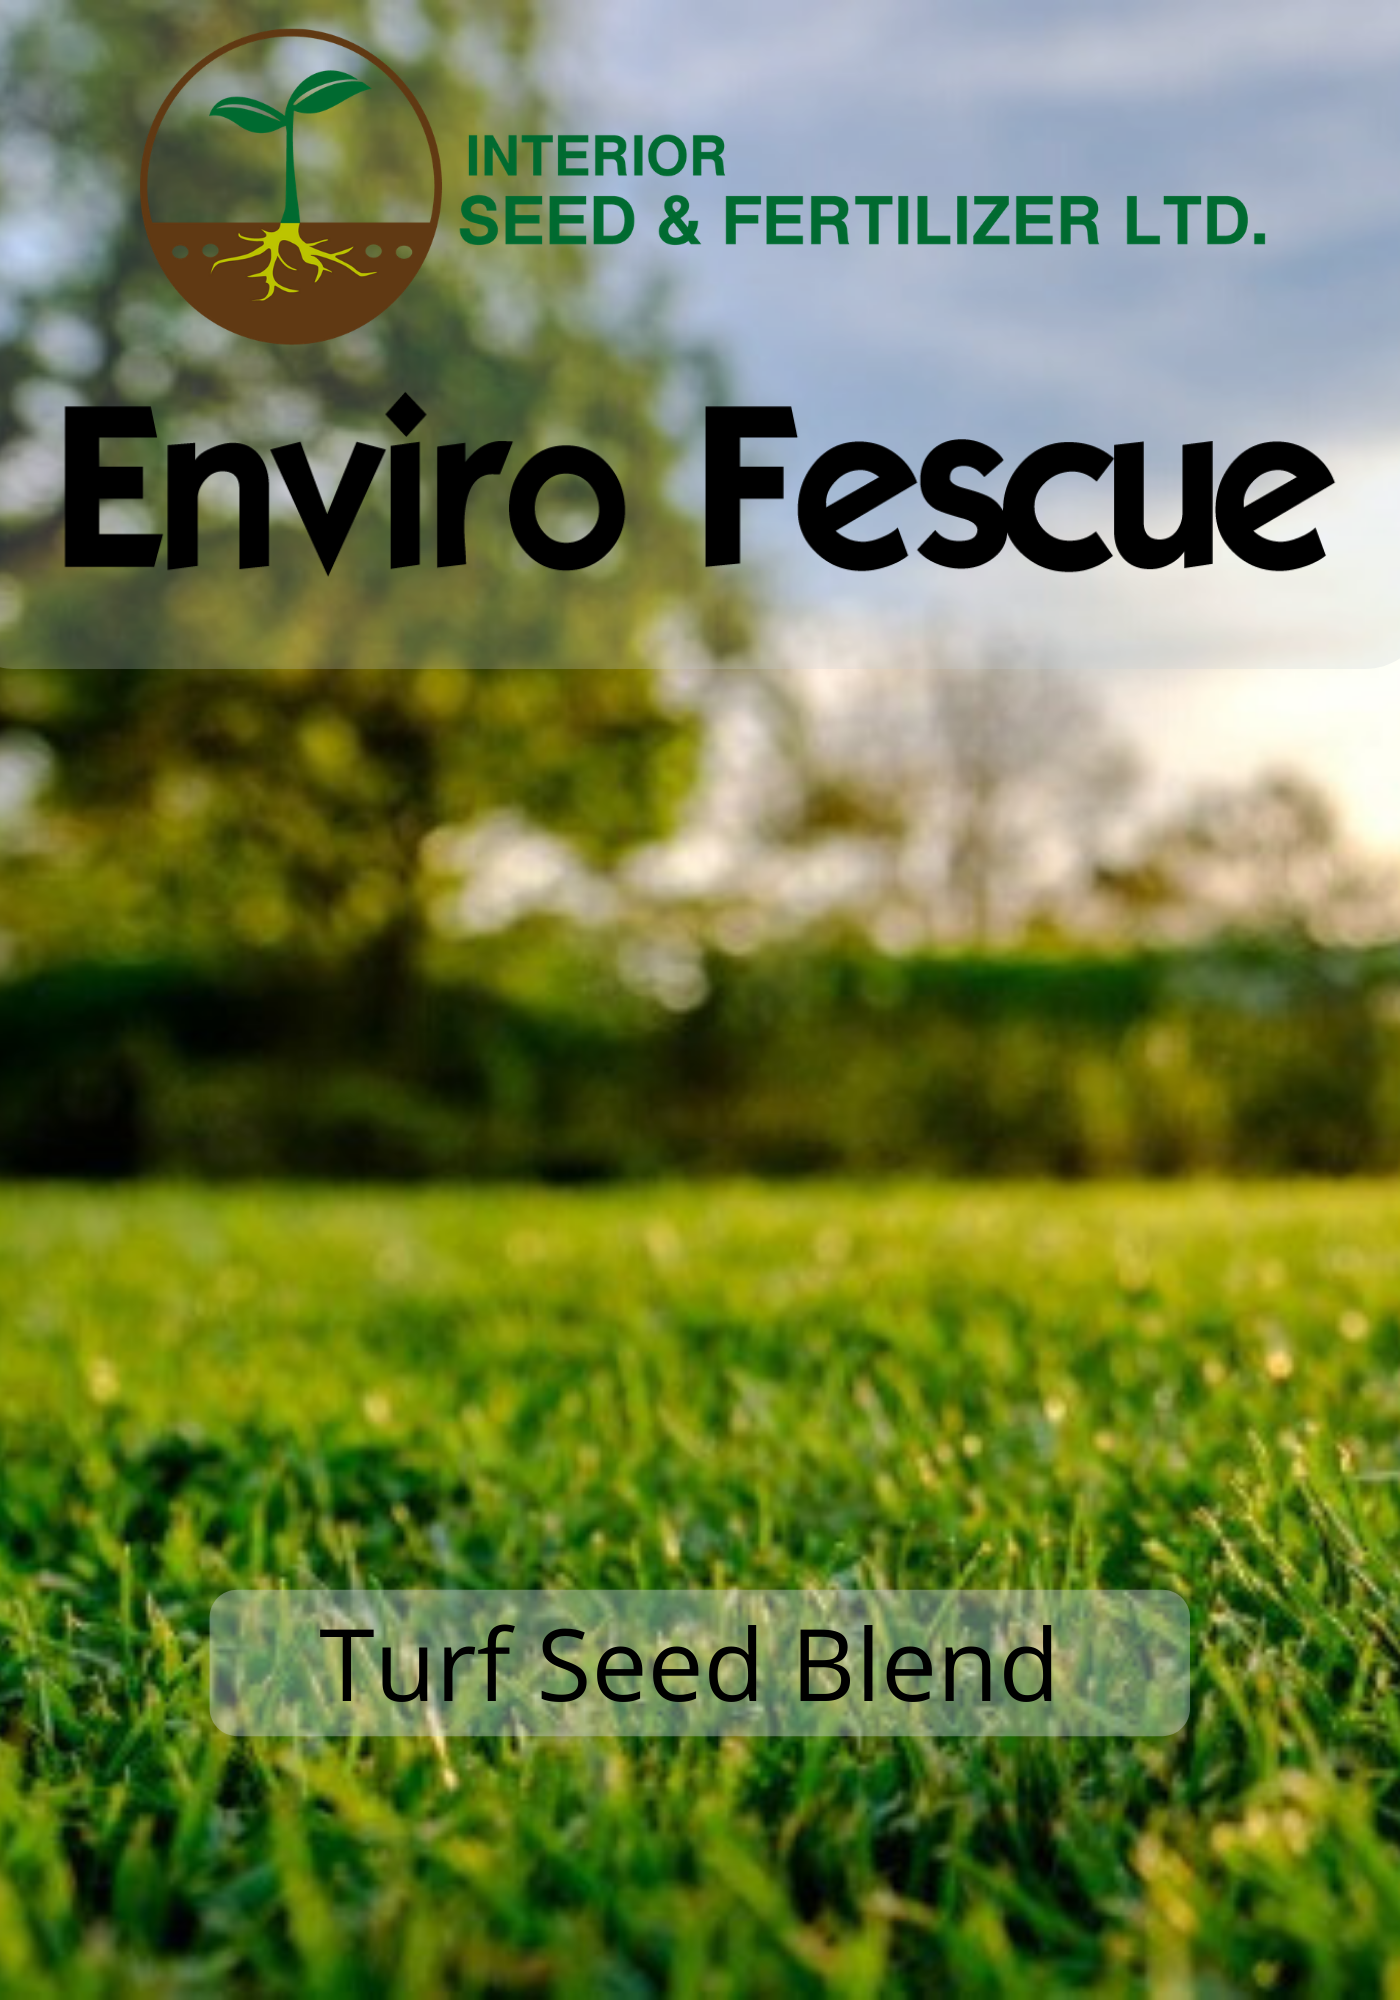 Lawn and Turf Blend called Enviro Fescue with Chewings Fescue, Eureka ll Hard Fescue,Annual Ryegrass, Creeping Red Fescue, Sheep Fescue from Interior Seed and Fertilizer Garden Centre in Cranbrook, BC